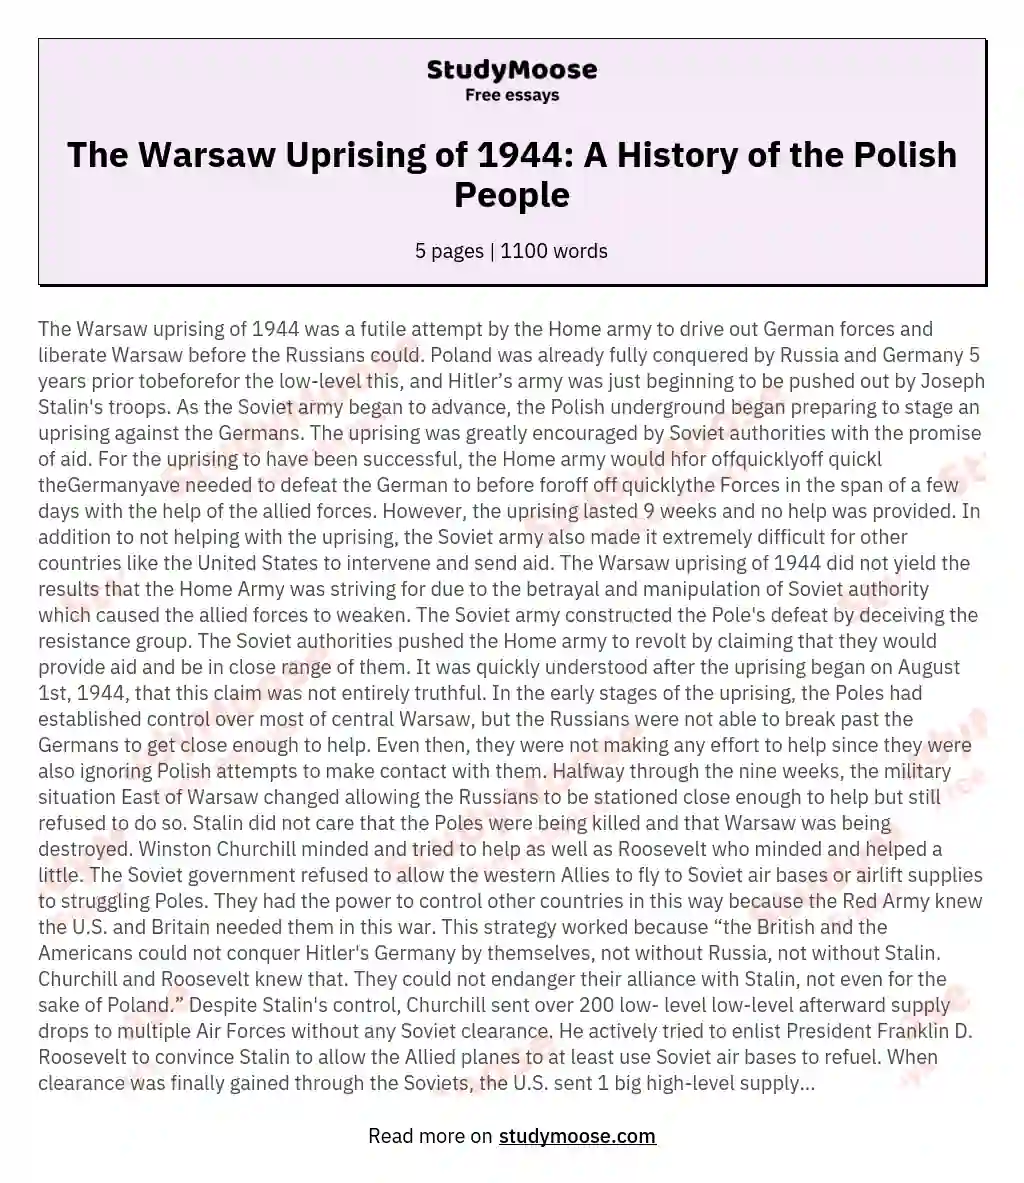 The Warsaw Uprising of 1944: A History of the Polish People essay